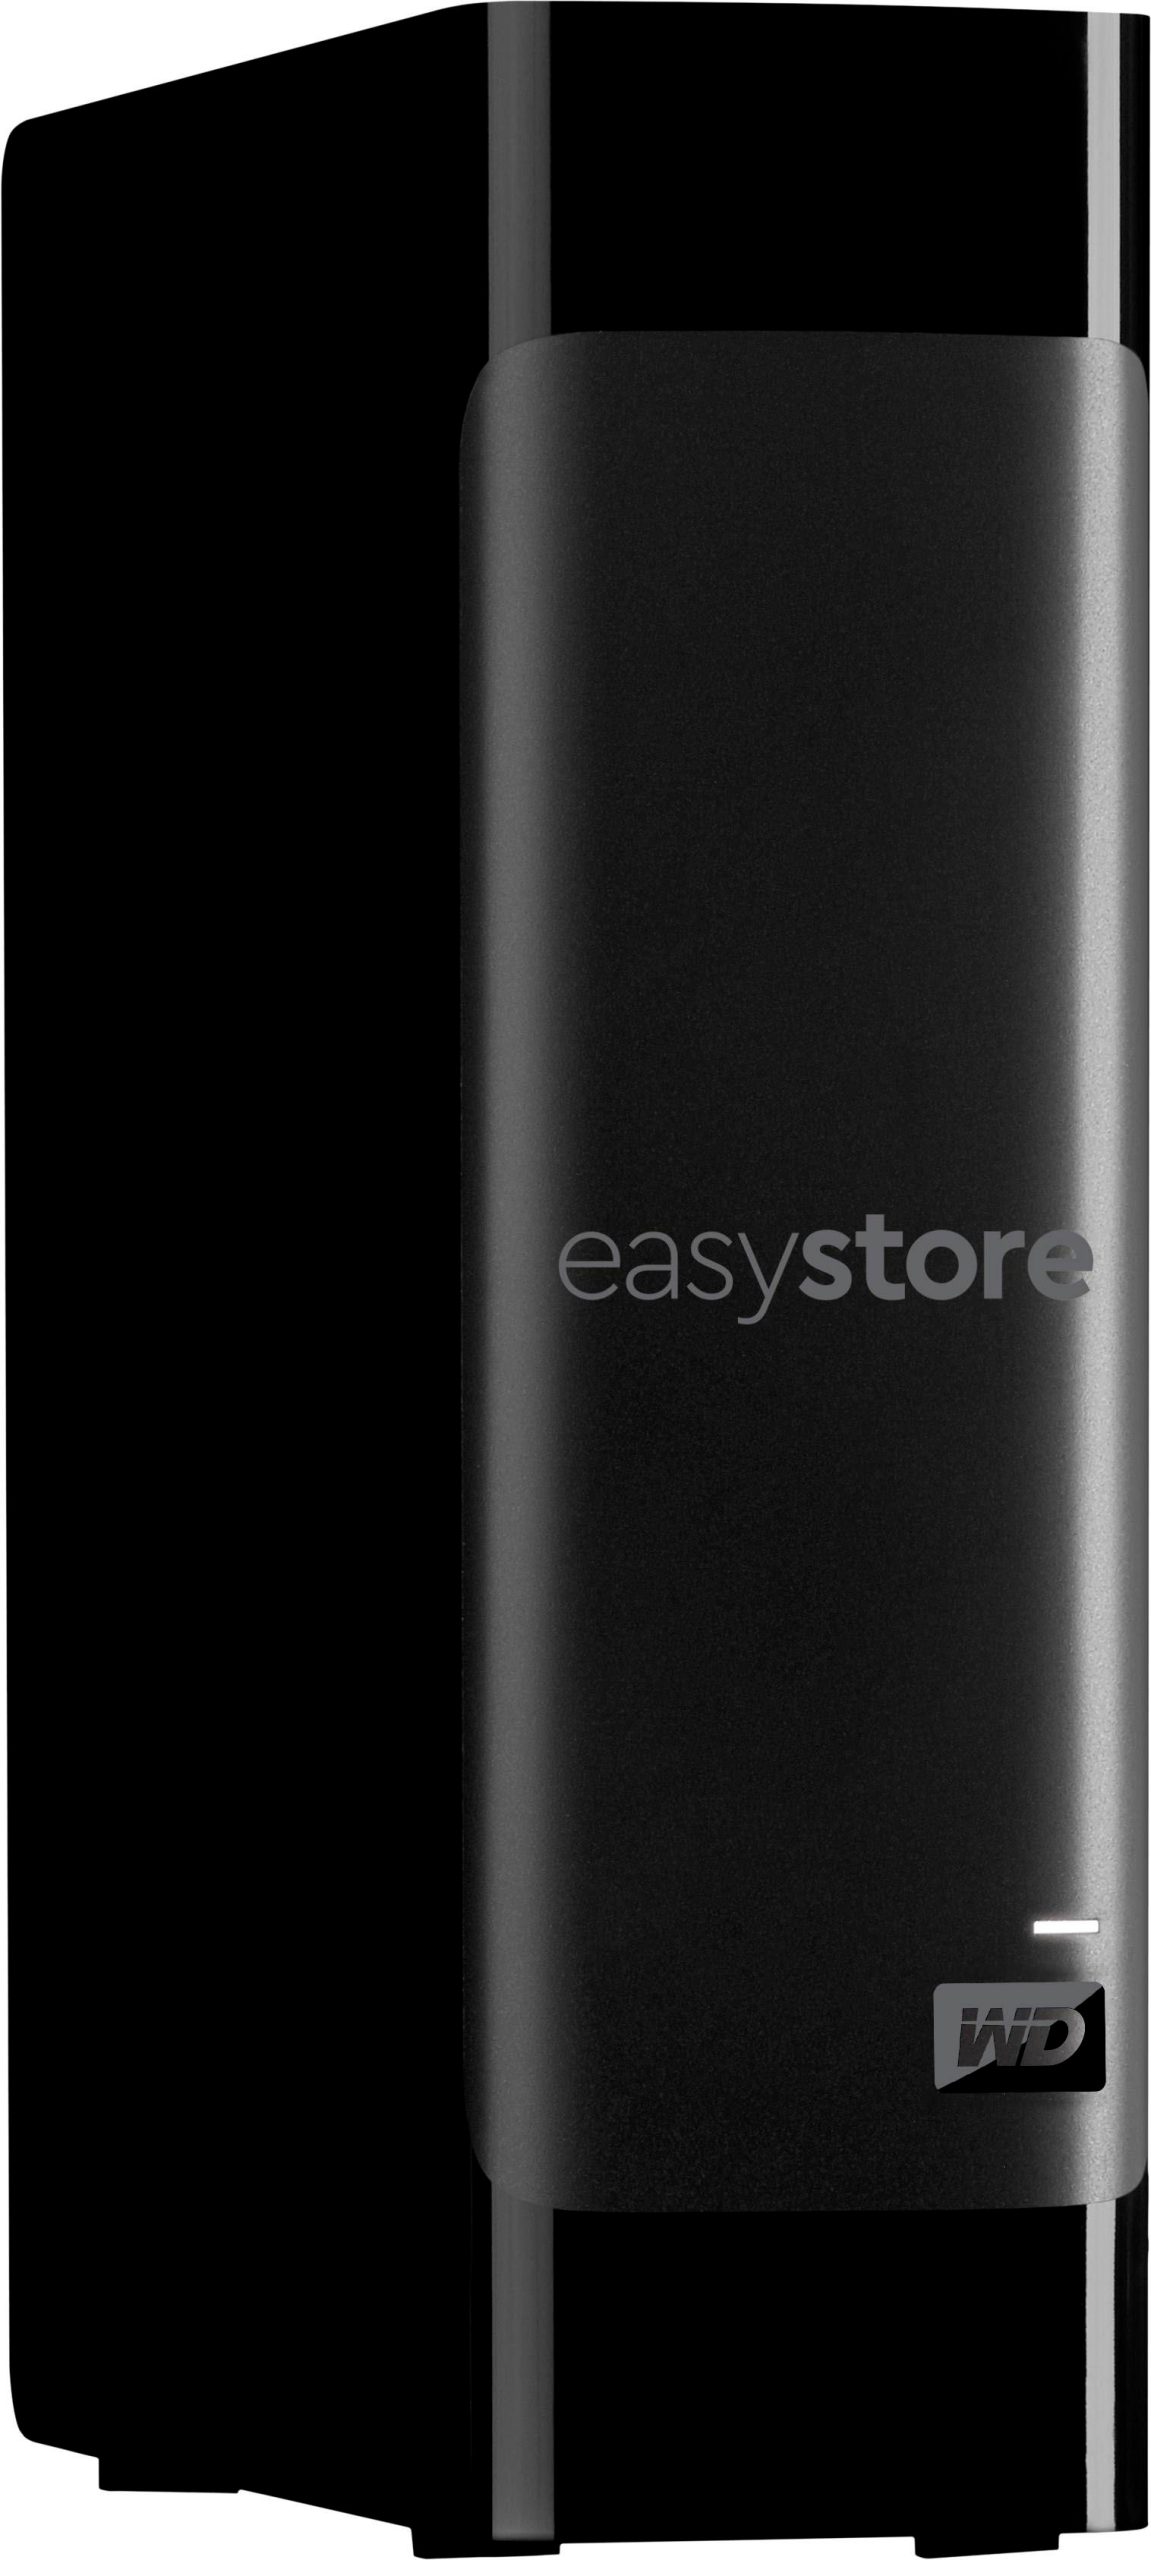 WD – easystore 14TB External USB 3.0 Hard Drive – Black – Just $199.99 at Best Buy